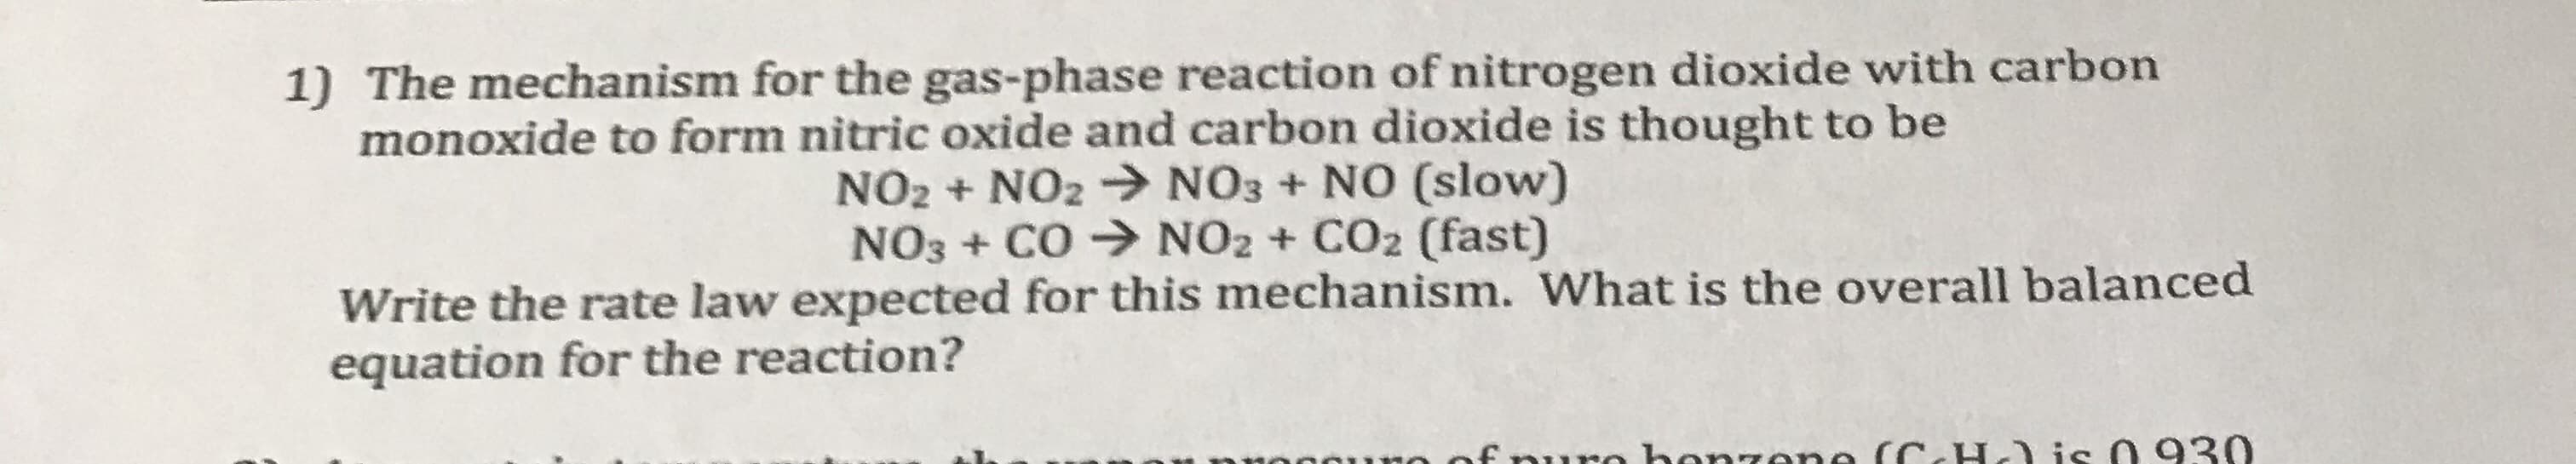 1) The mechanism for the gas-phase reaction of nitrogen dioxide with carbon
monoxide to form nitric oxide and carbon dioxide is thought to be
NO2 + NO2 > NO3 + NO (slow)
NO3 + CO → NO2 + CO2 (fast)
Write the rate law expected for this mechanism. What is the overall balanced
equation for the reaction?
